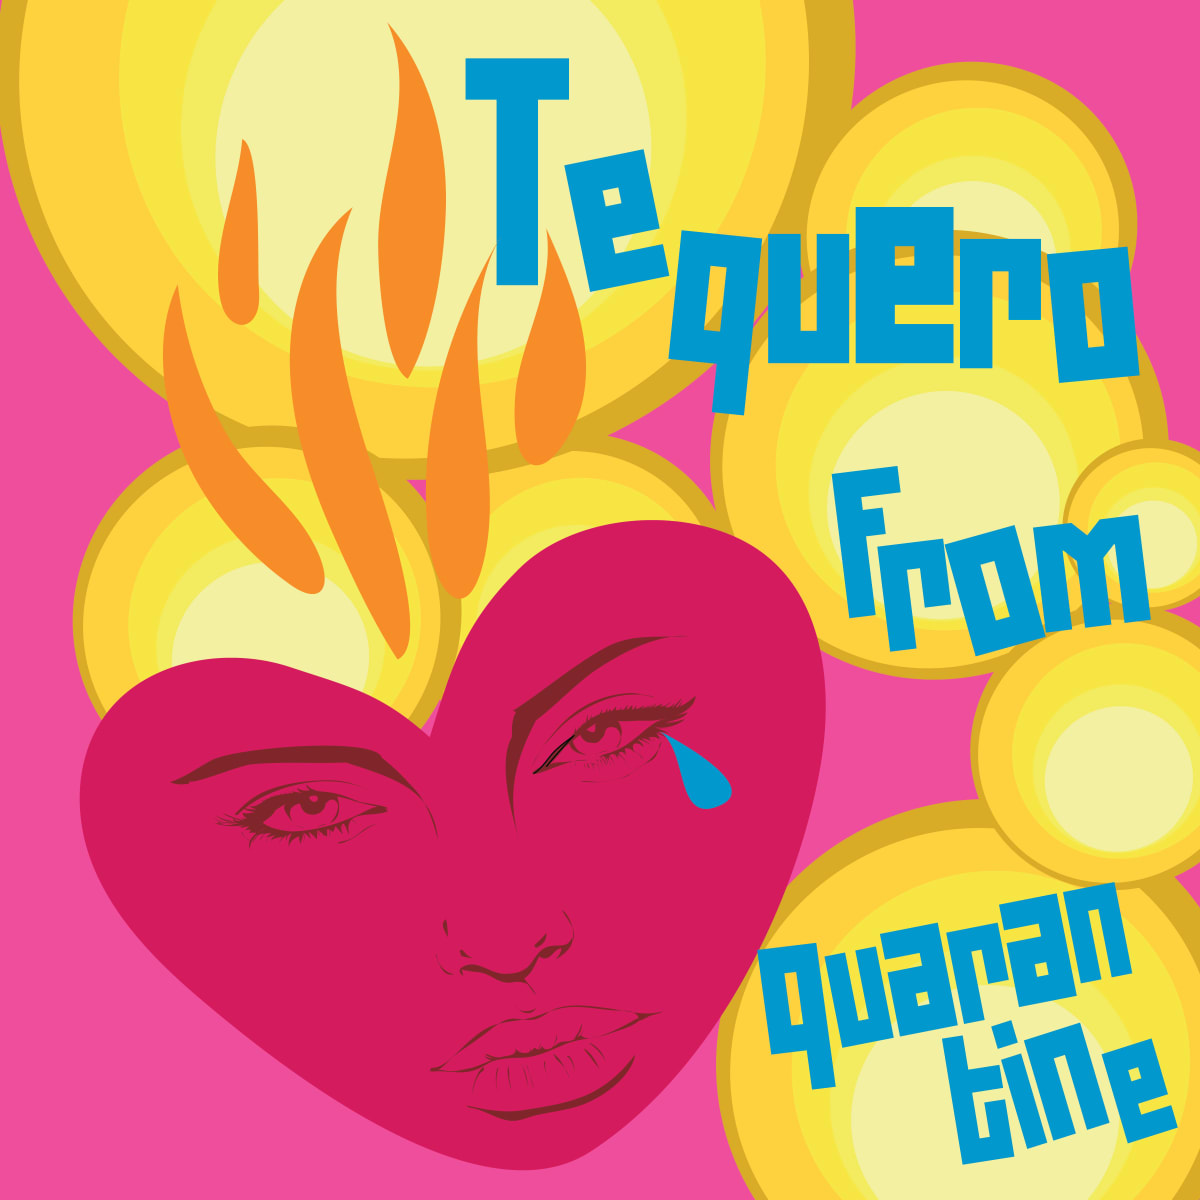 Te quero from quarantine  Image: Te quero from quarantine is a drawing depiction of creating a climate of consistency in a relationship and making a safe space to ask intimate and vulnerable questions when times are hard is very important during pandemics days of isolation and community shutdown. Partners need to be able to give each other space and meet the needs of one another with love, respect, and communication. It's crucial for a person to create a connection with all their relationships amidst quarantine and maintain them by staying connected virtually but for many technology is not available or easily navigated. (Click the purchase link for size options)